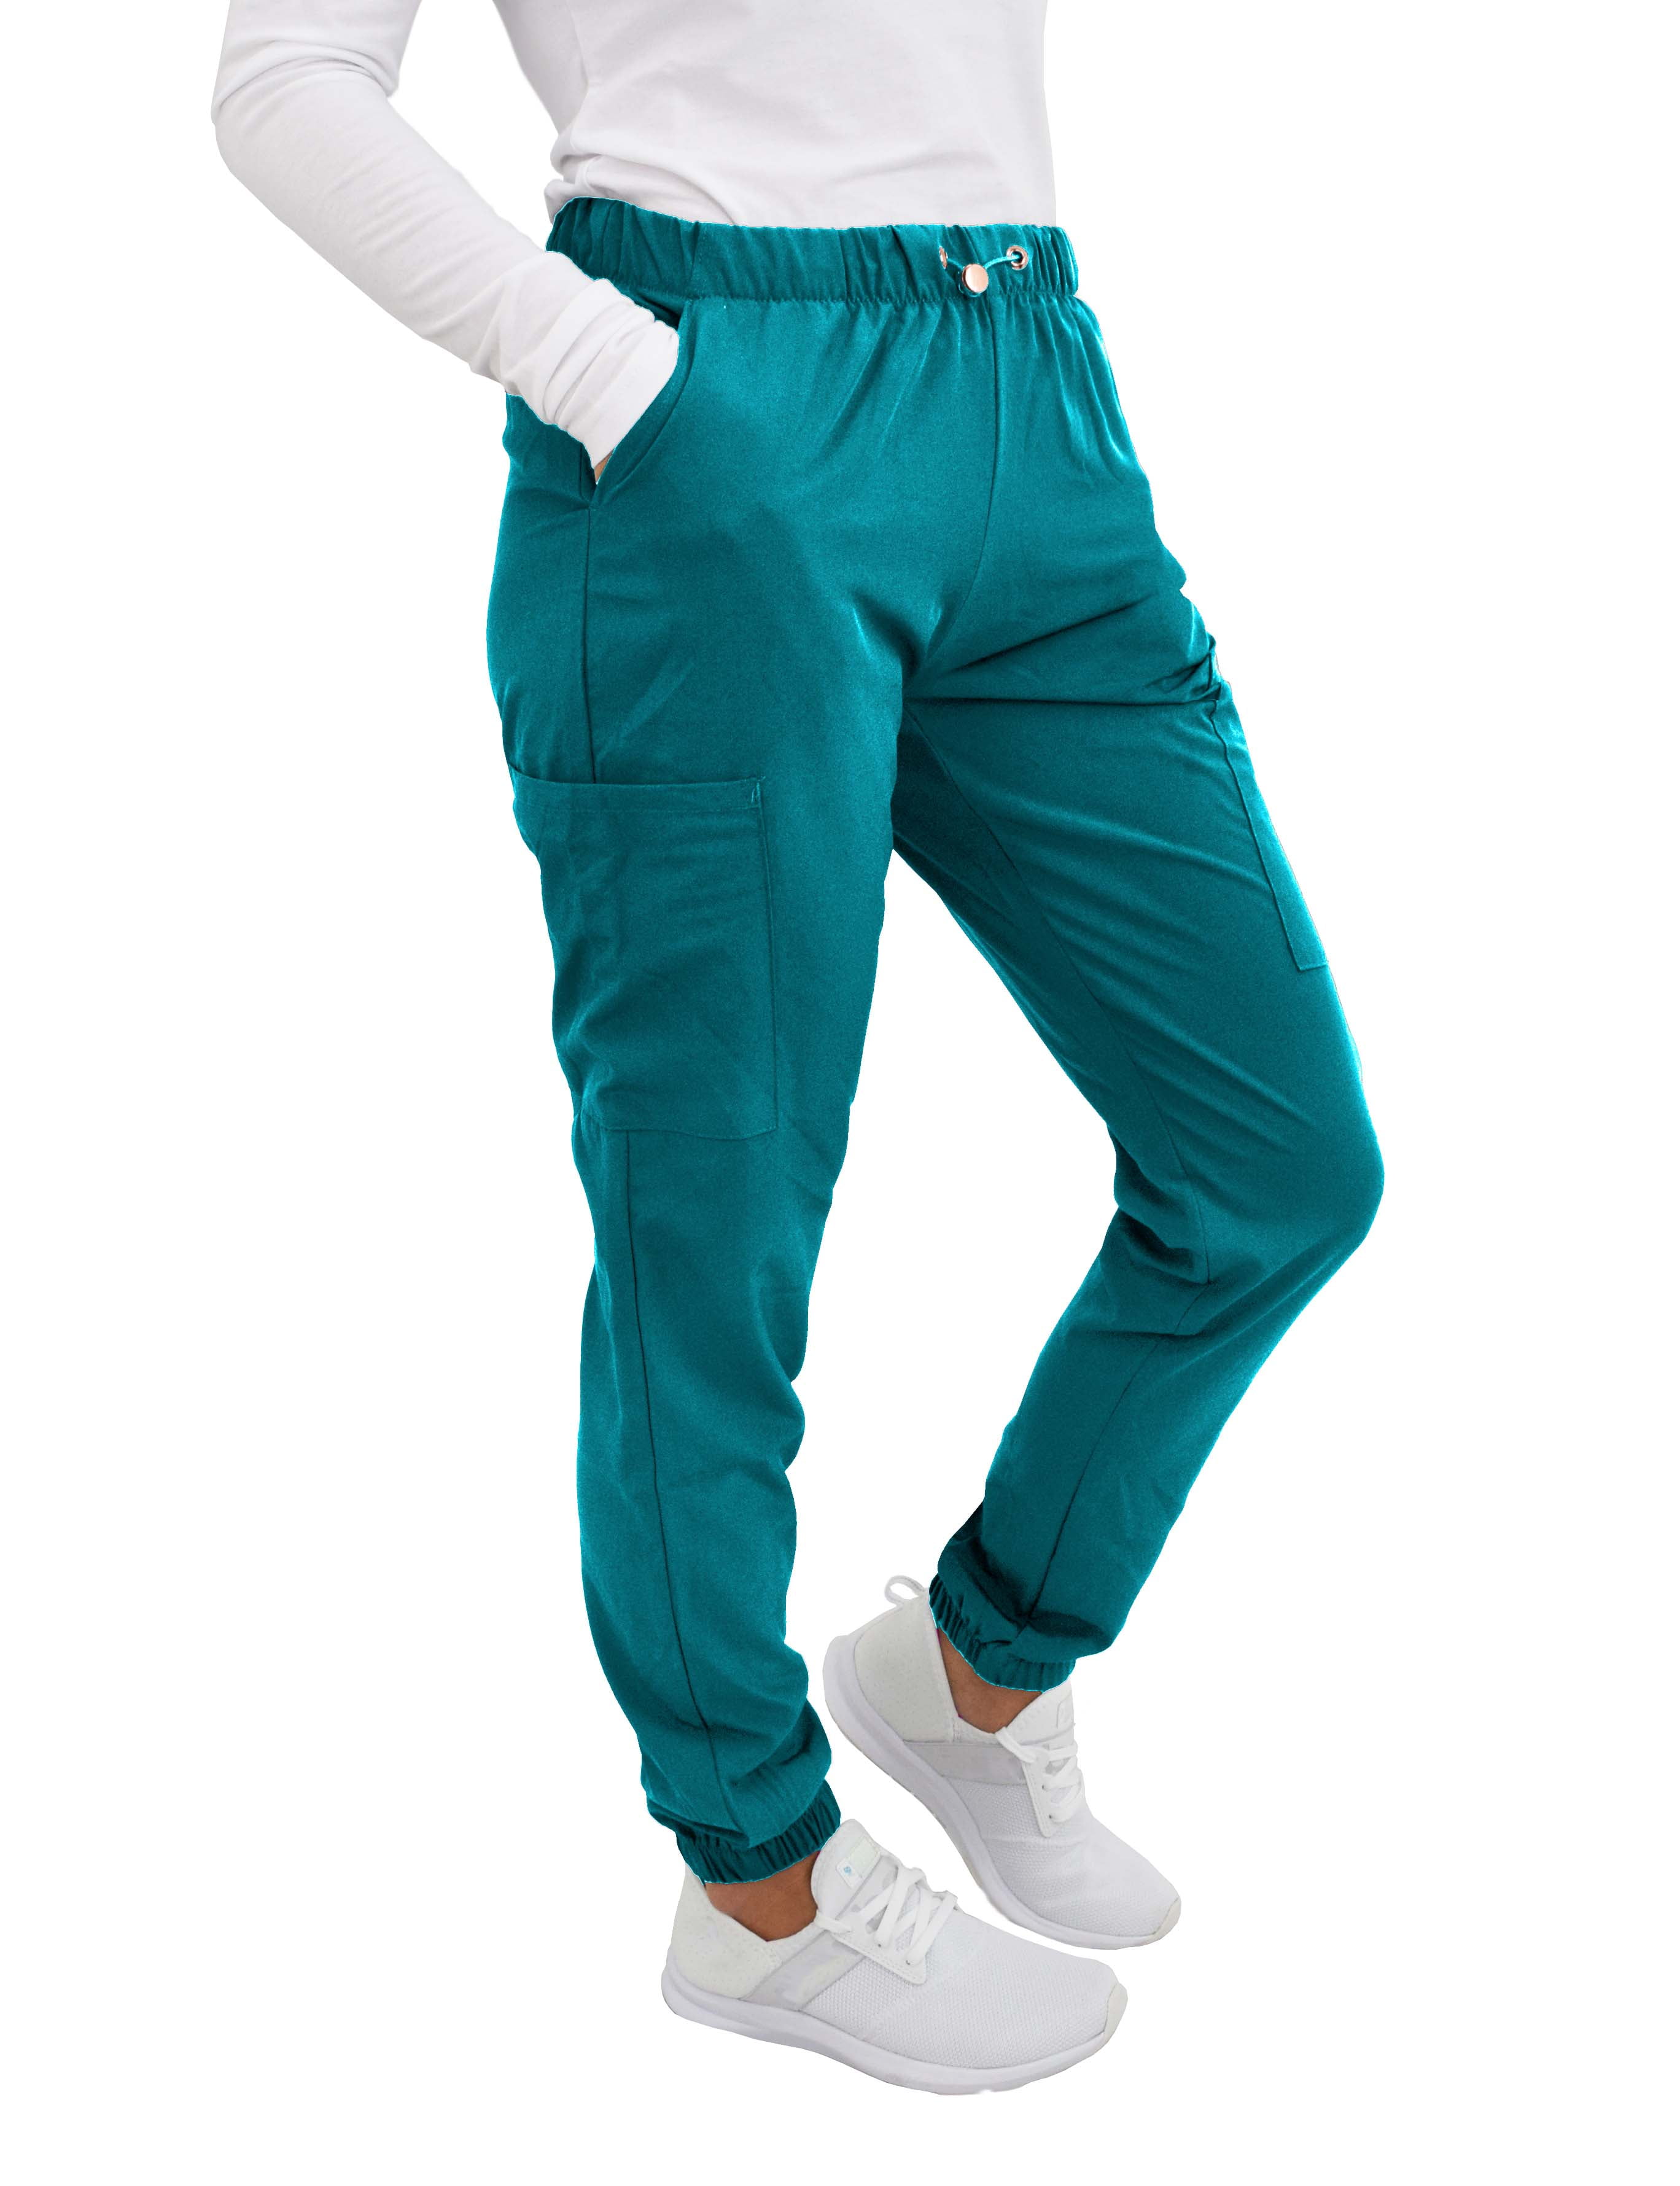 Green Town Scrubs for Women - Jogger Scrub Pant, Cargo Pockets, Stretch  Fabric, Drawcord, Easy Care